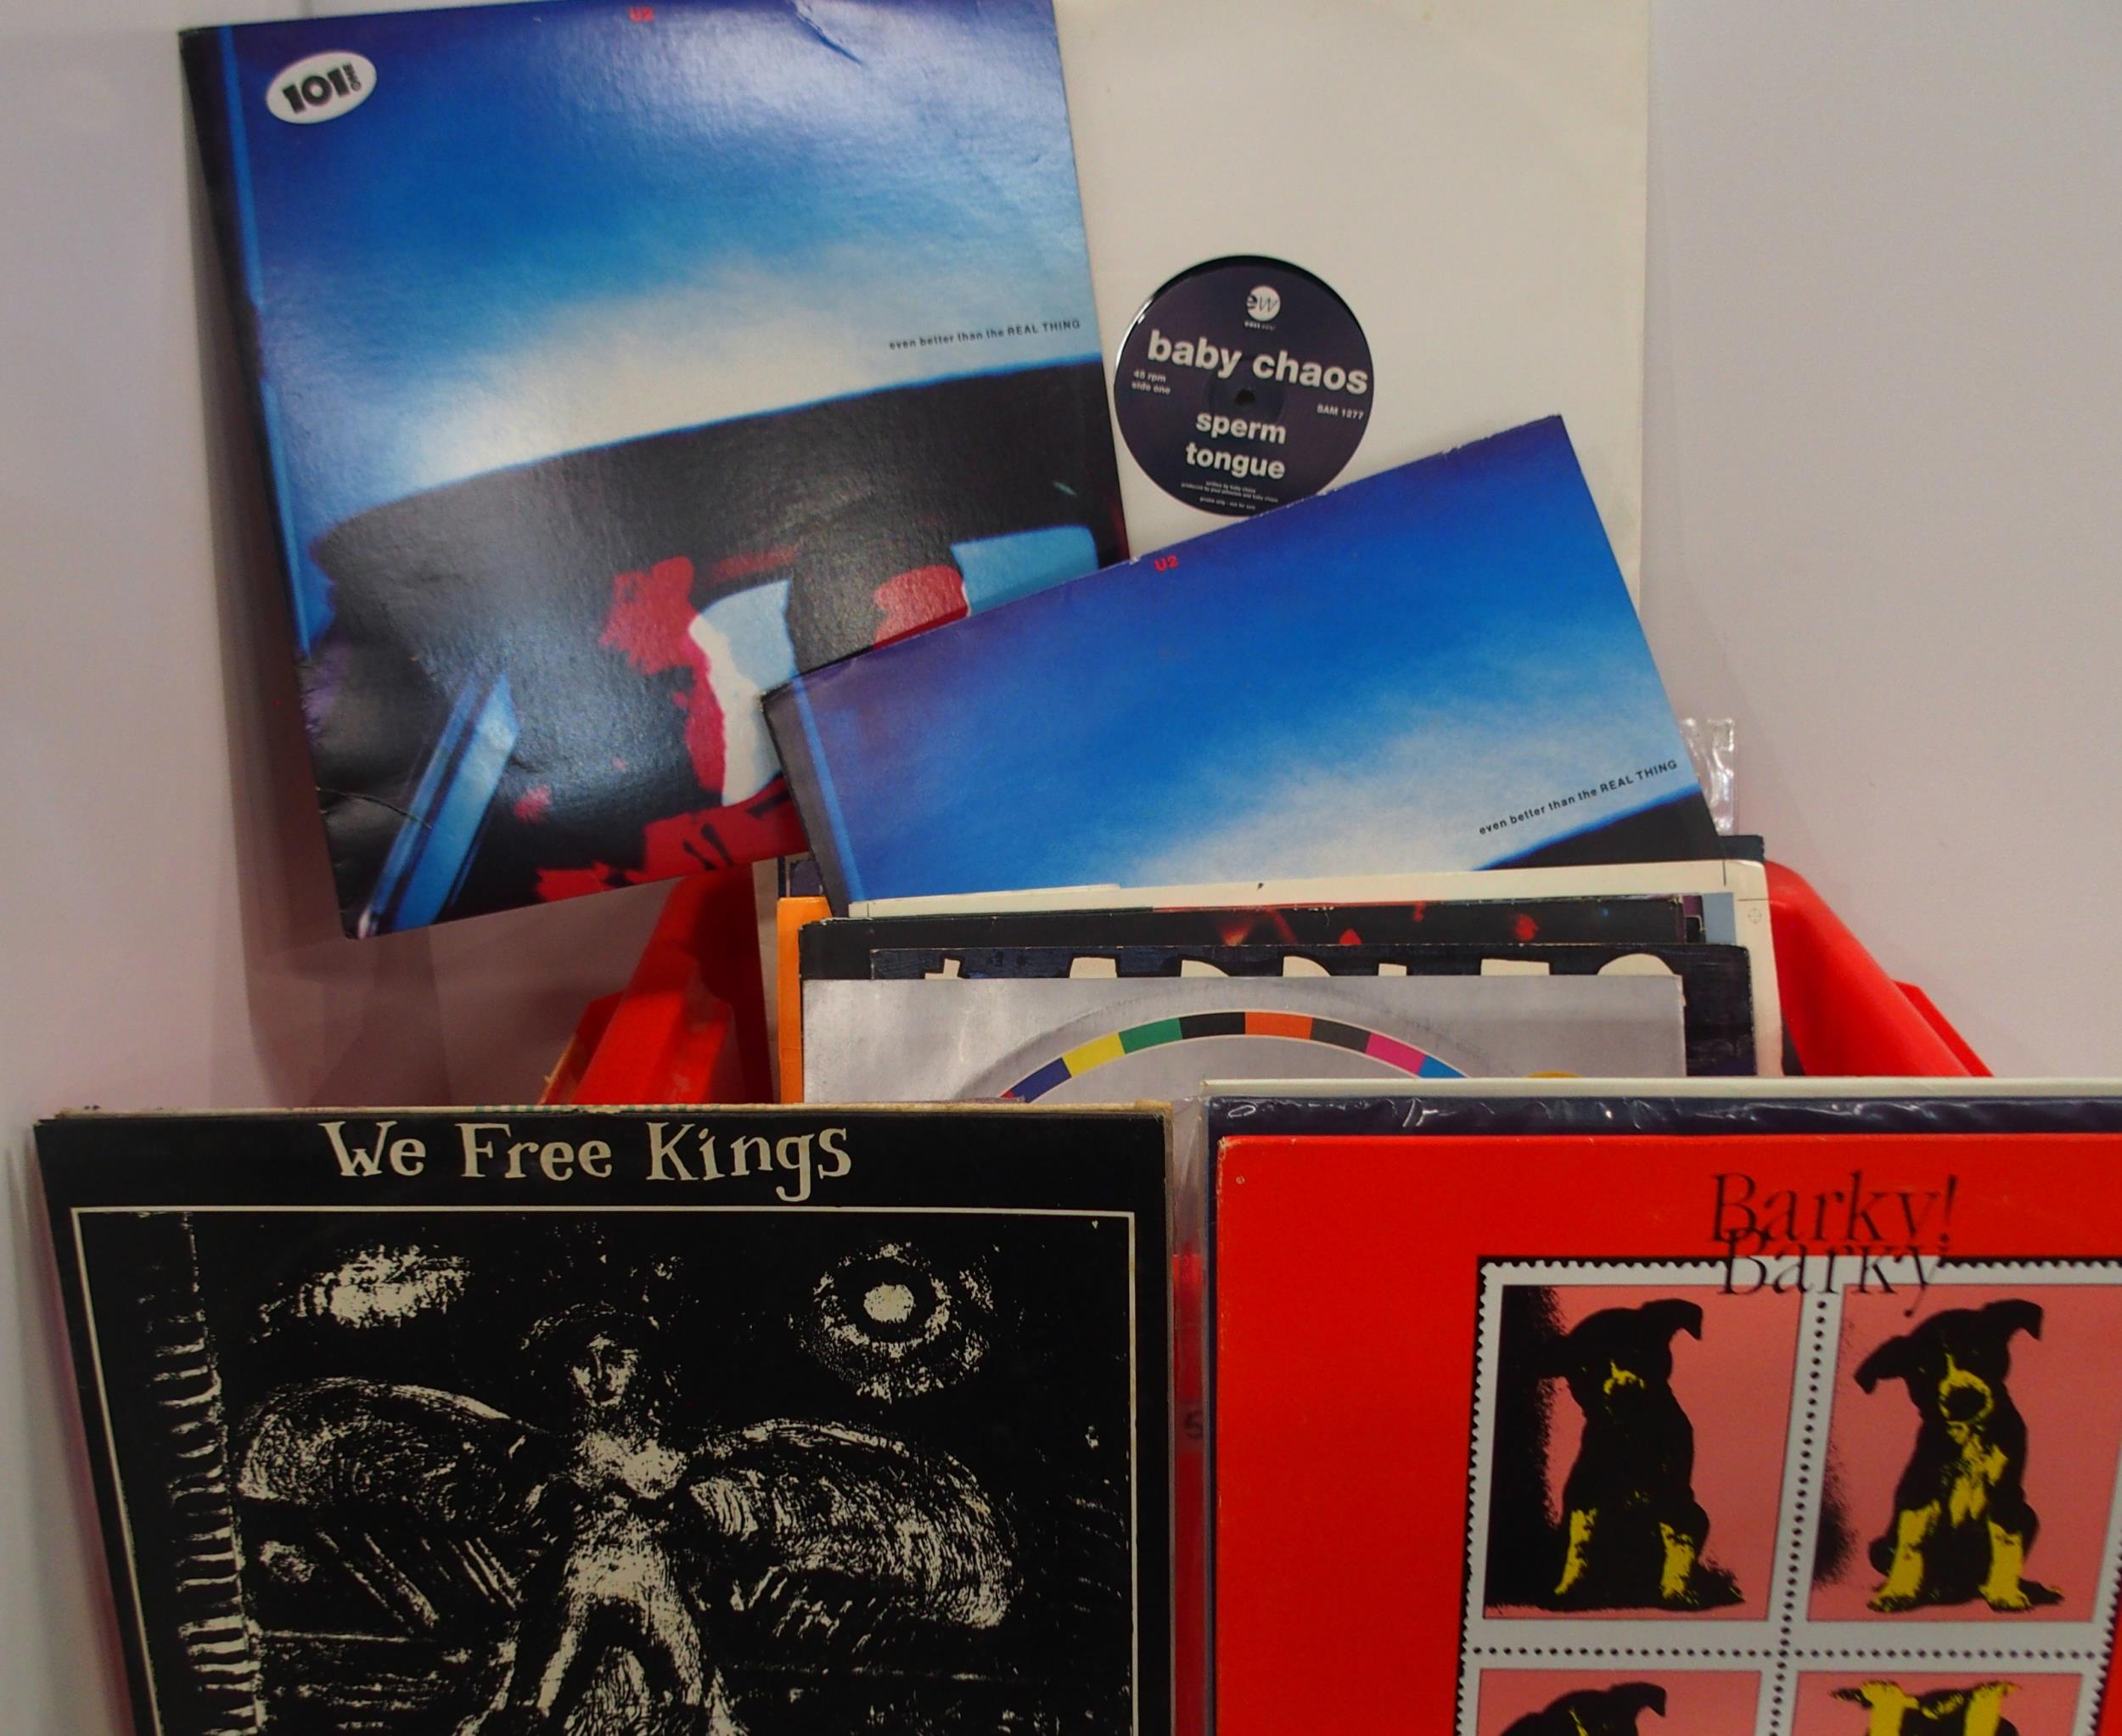 A collection of EP vinyl records with rare copies to include Kerosene, Wee Free Kings, Gary Numan,